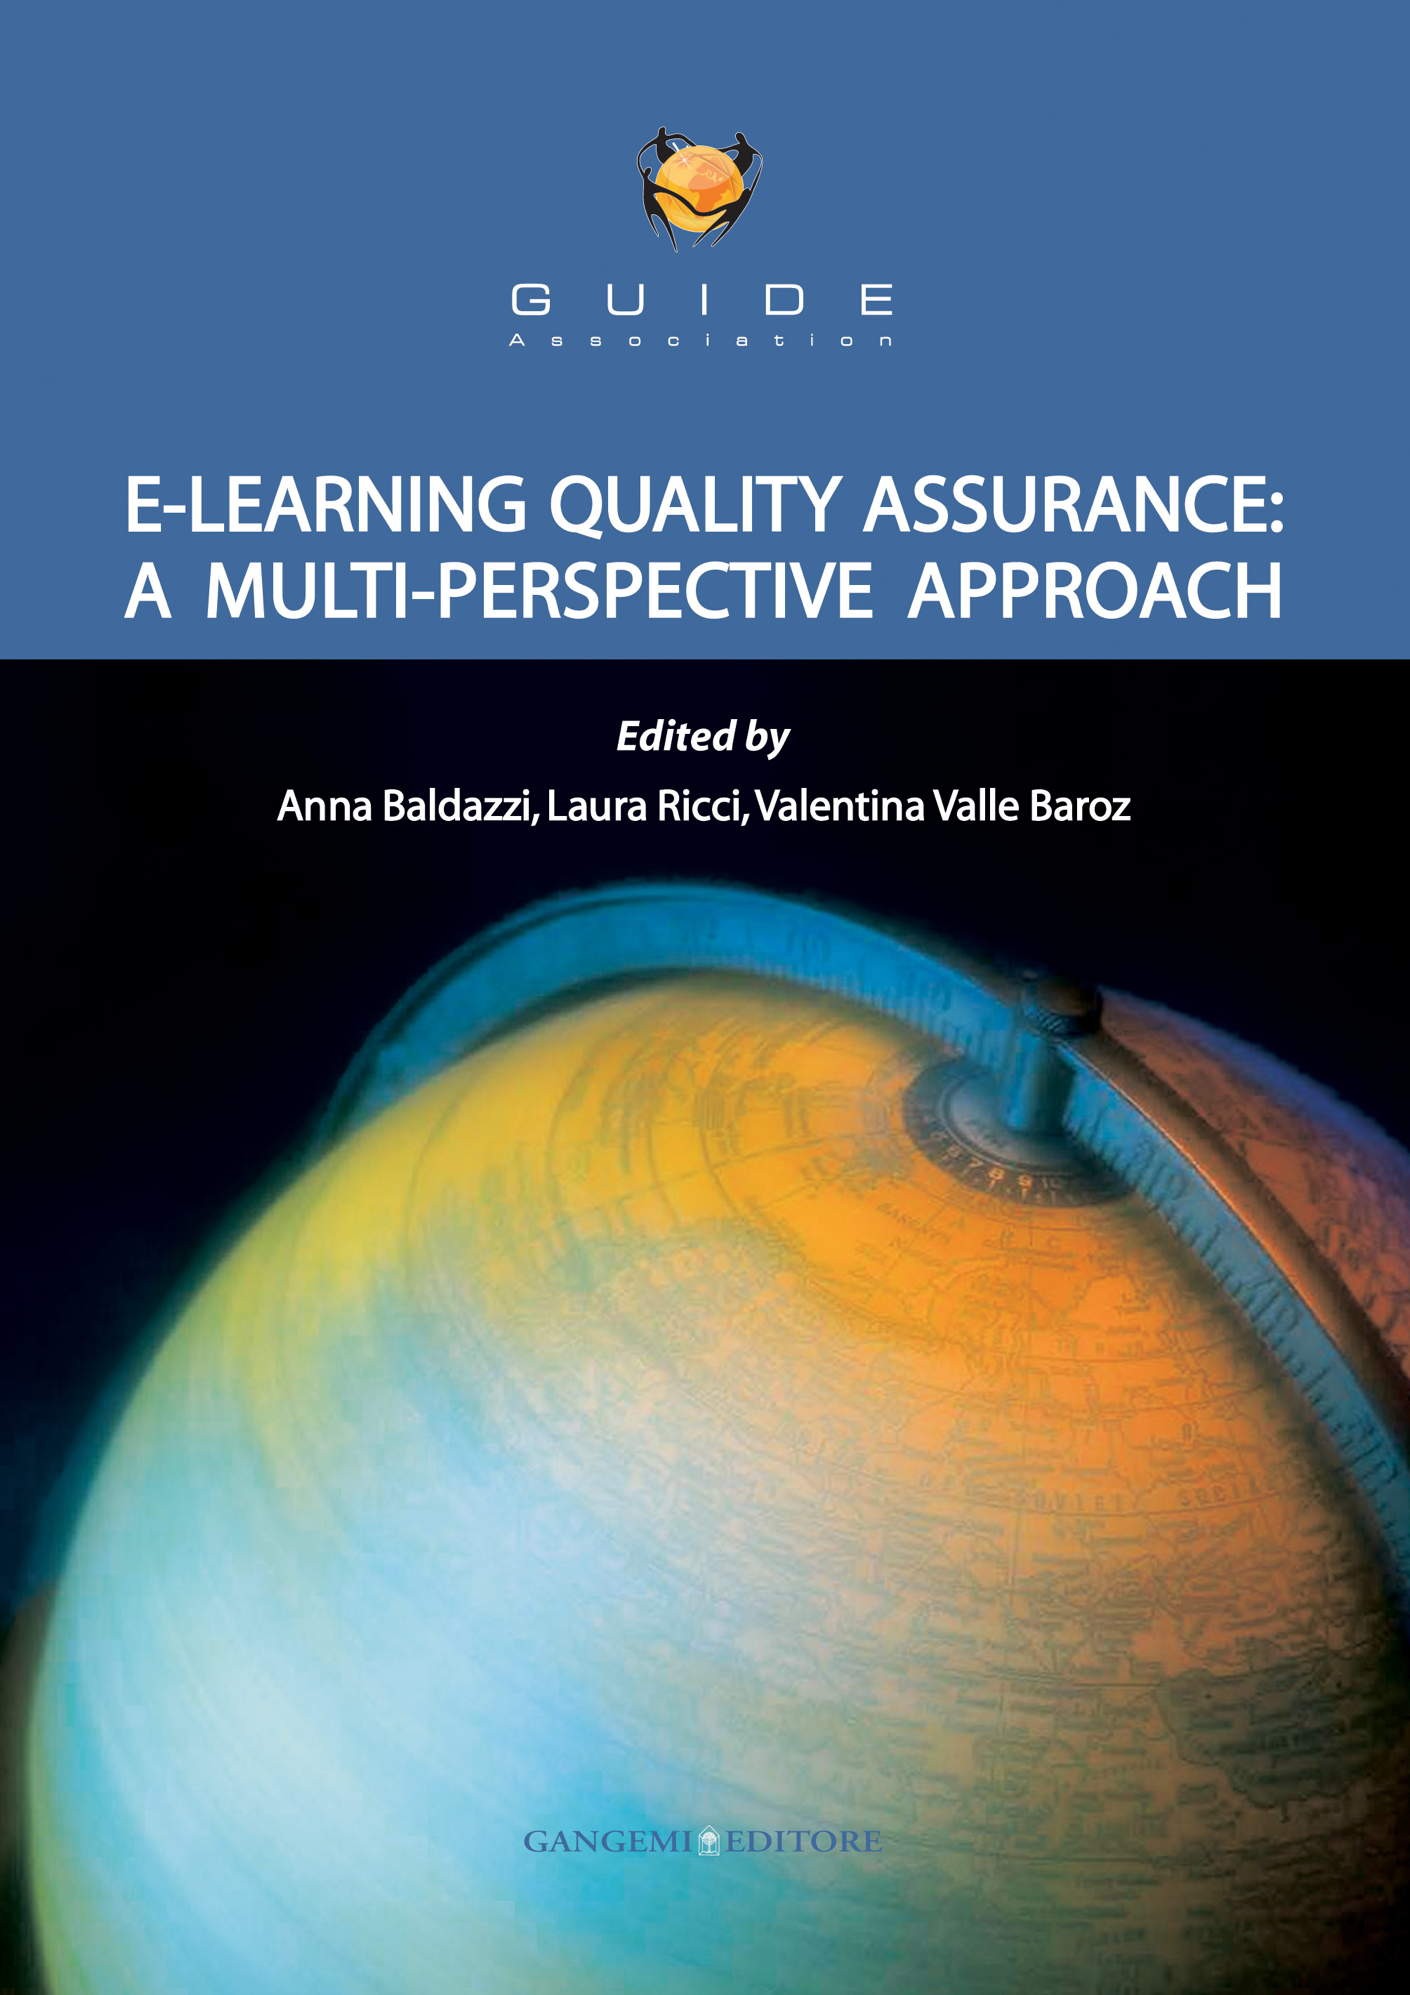 E-learning quality assurance: a multi perspective approach - Librerie.coop